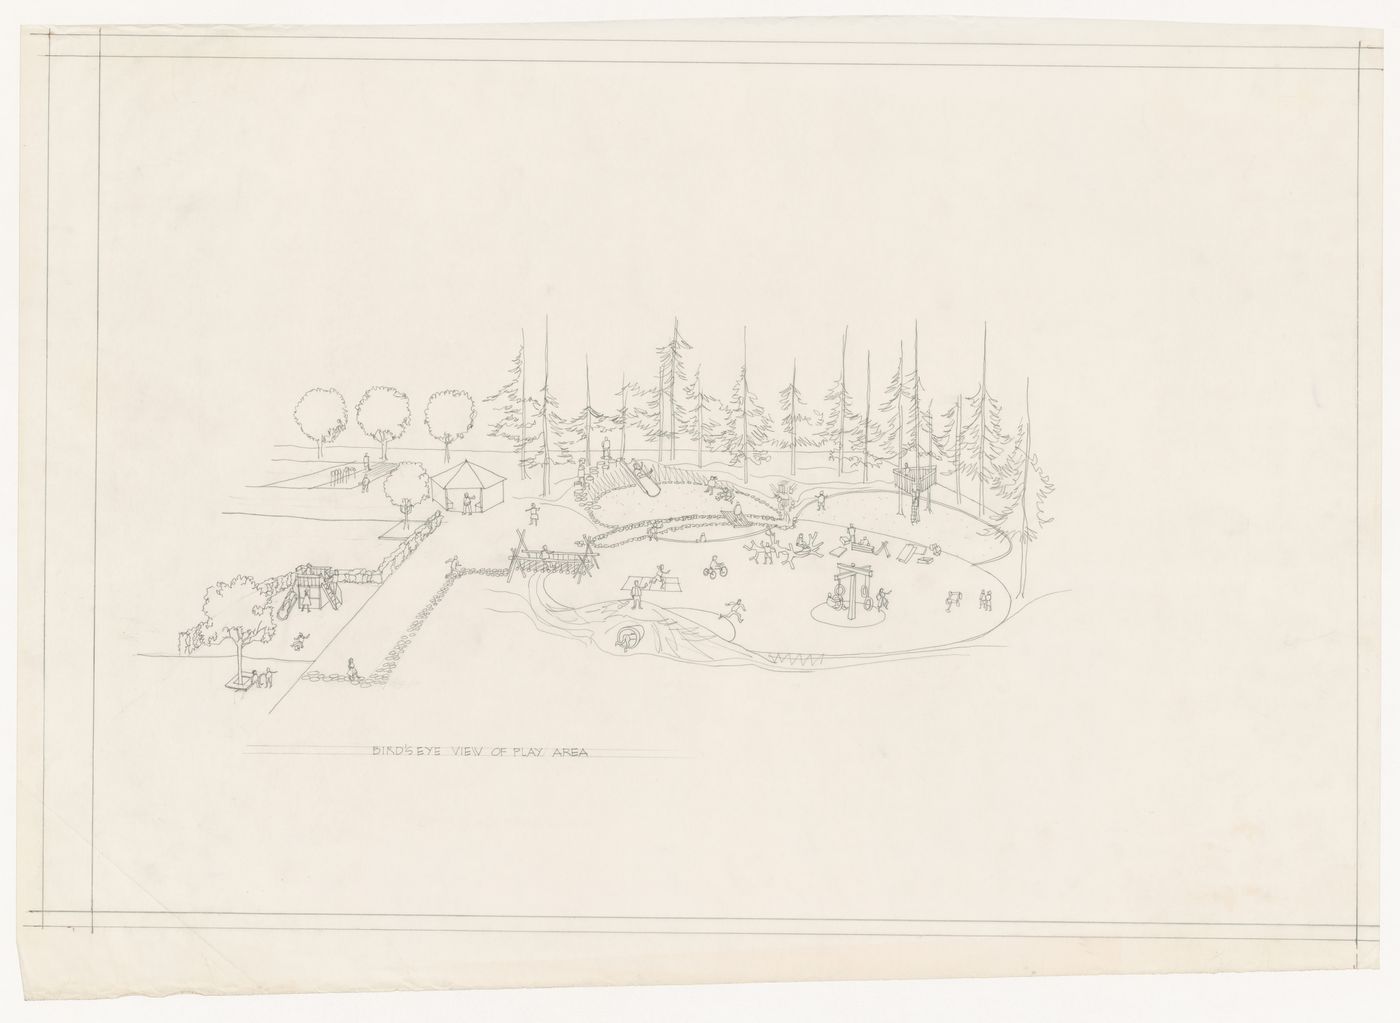 Bird's eye view of play area for Eileen Colbert Home, Vancouver, British Columbia